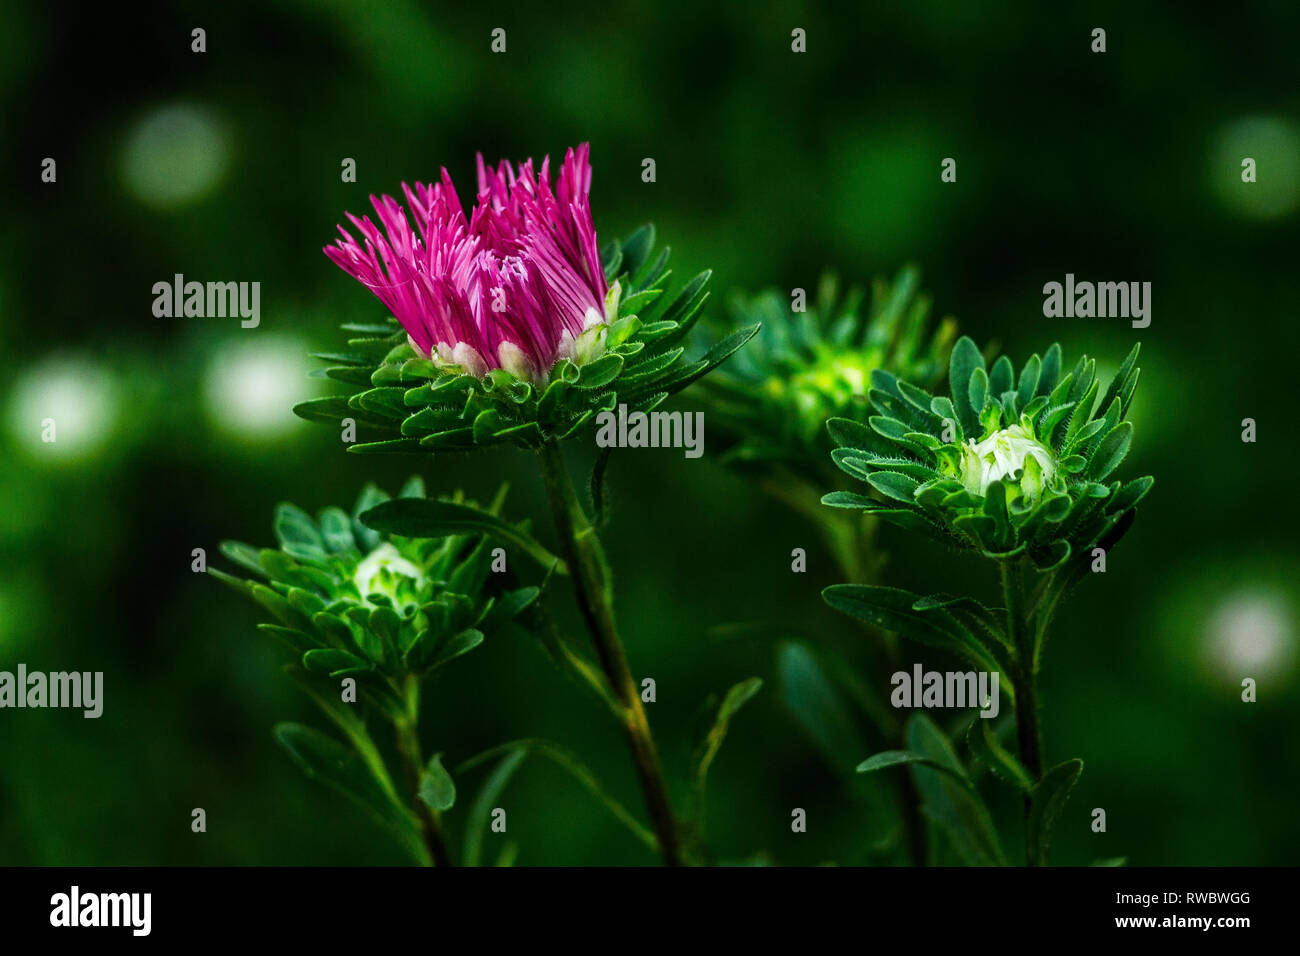 Beautiful colorful aster flowers blossom. Autumn violet flowers with green petals. Ukrainian aromatic flowers Stock Photo